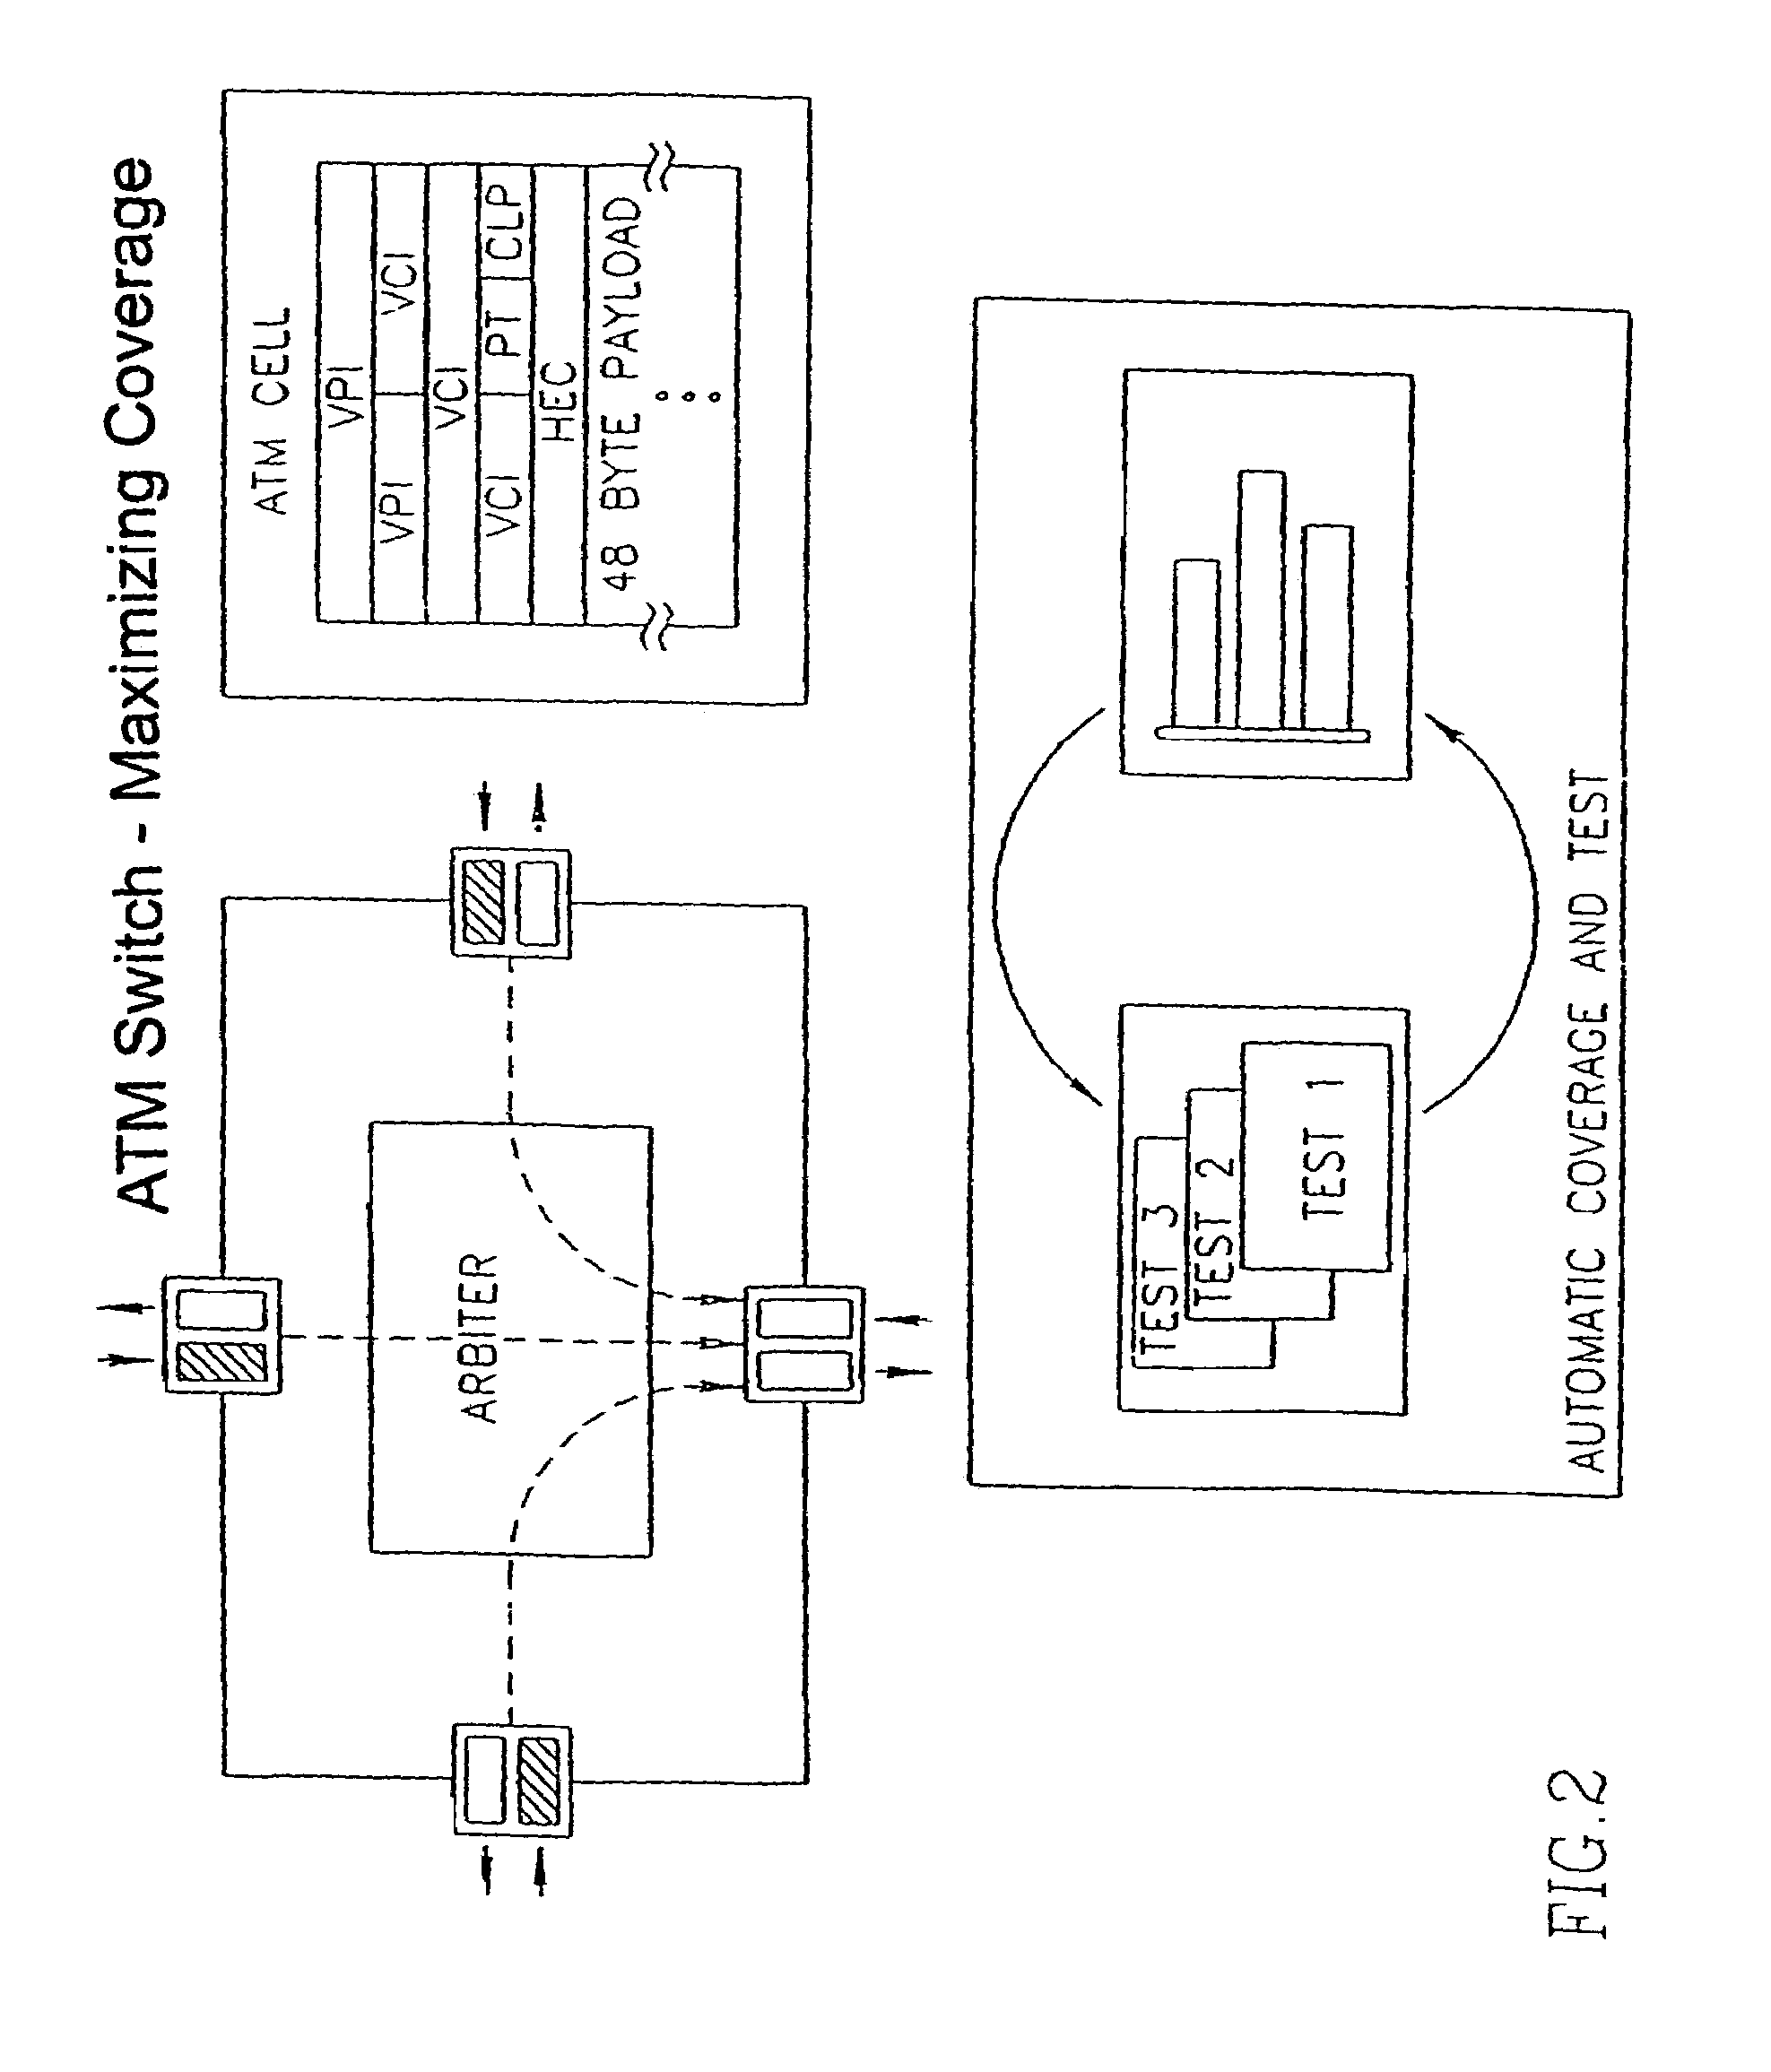 Method and apparatus for maximizing test coverage